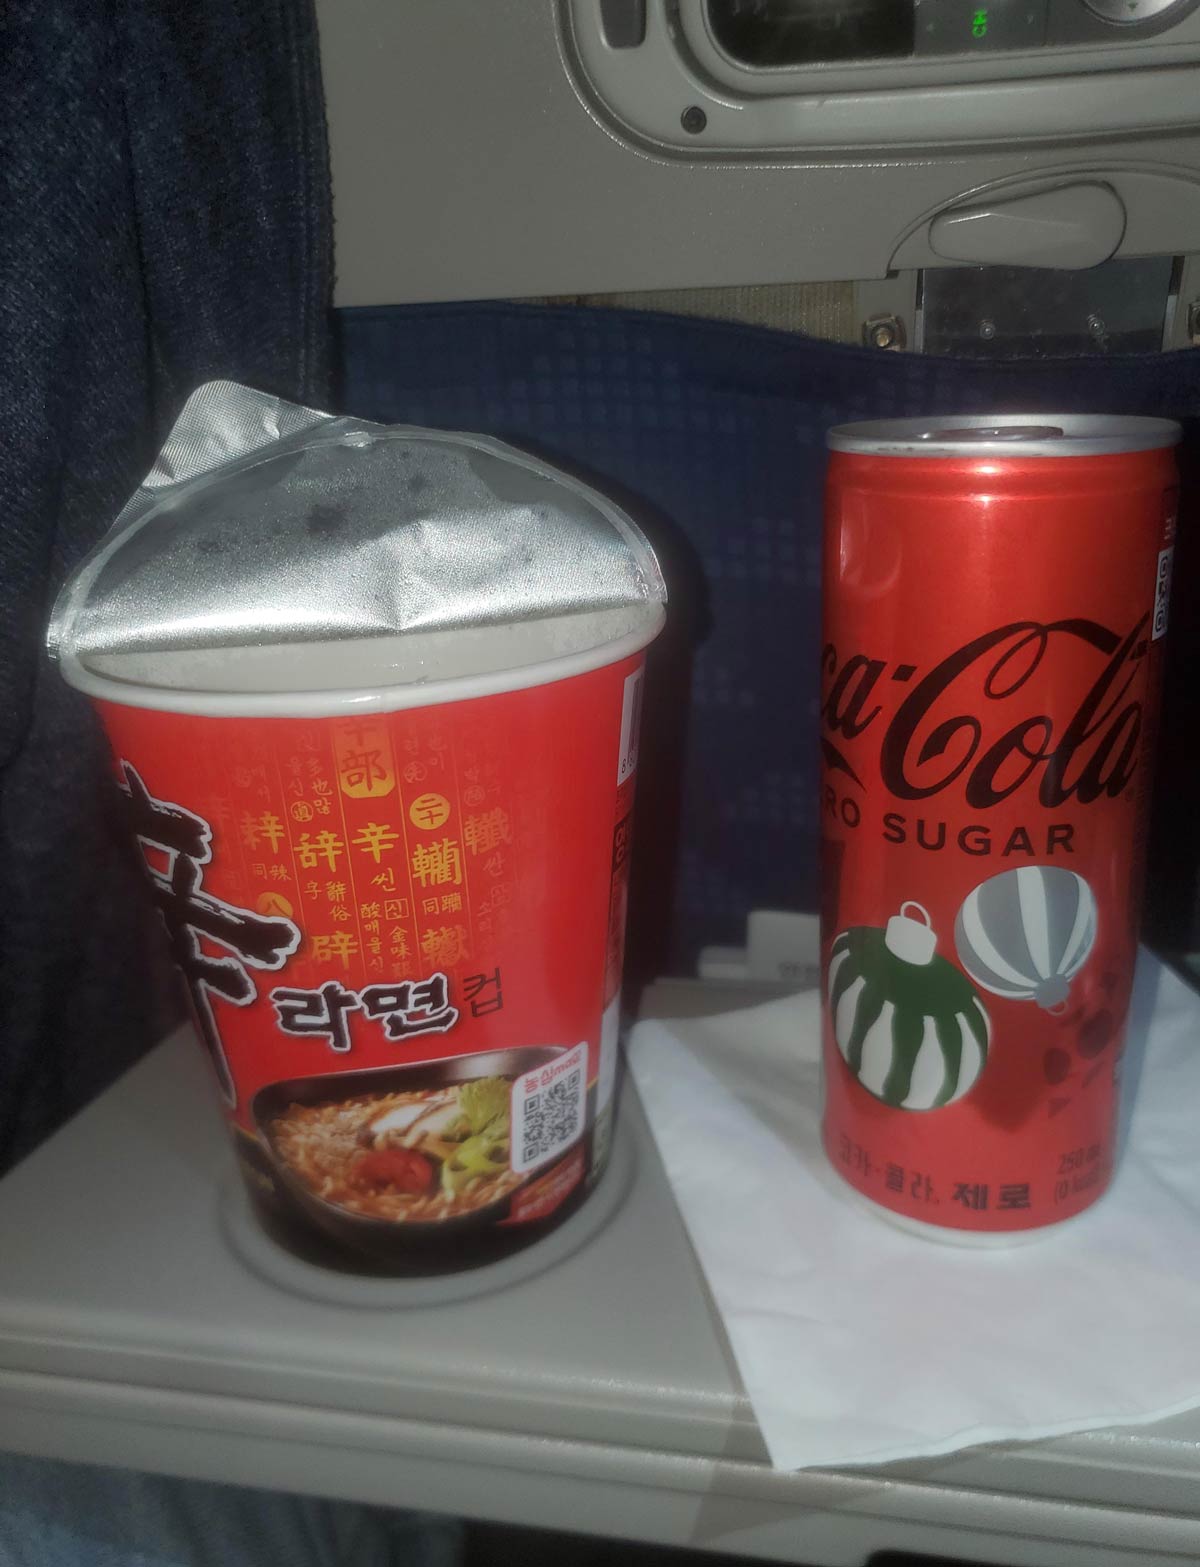 I flew Korean Air and asked for a rum and coke. Something must have got lost in translation